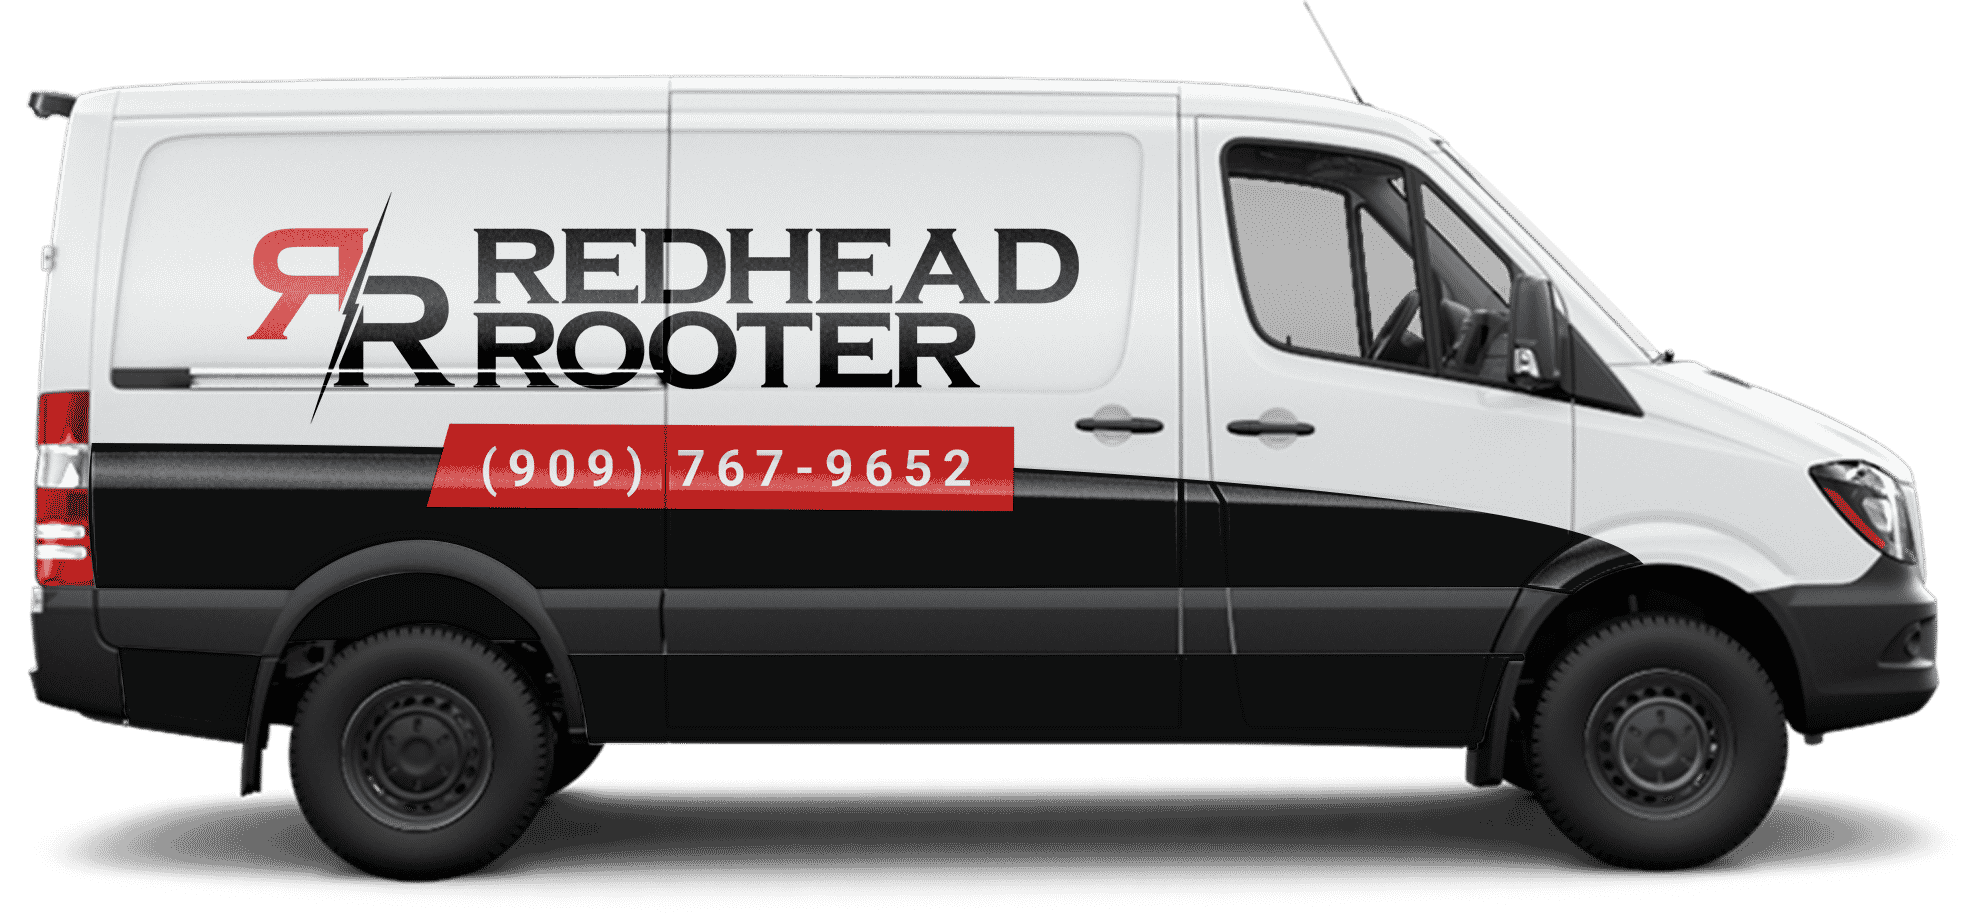 Professional Plumbing- RedHead Rooter Inc. in Upland, CA